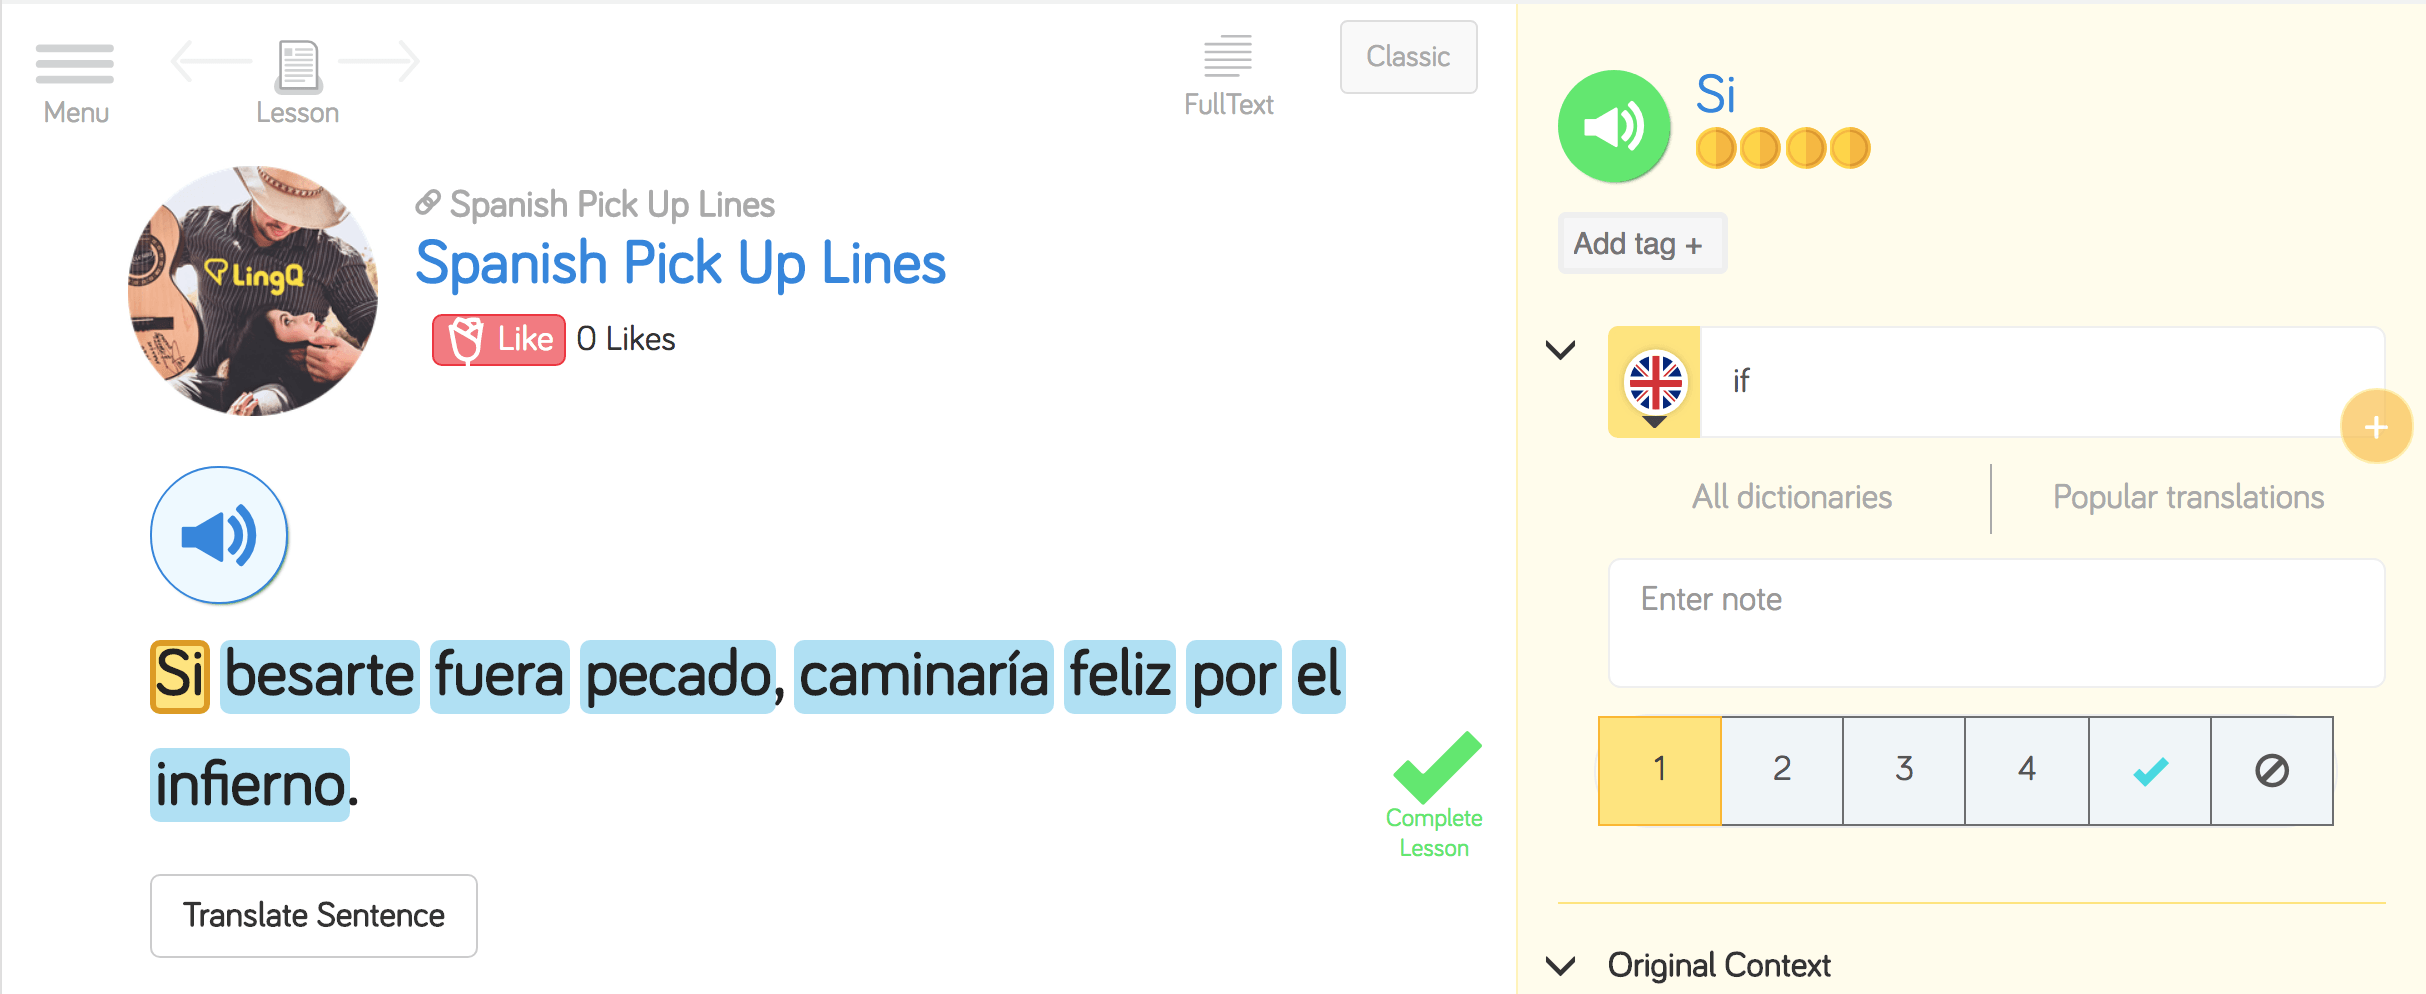 Learn Spanish pickup lines online at LingQ